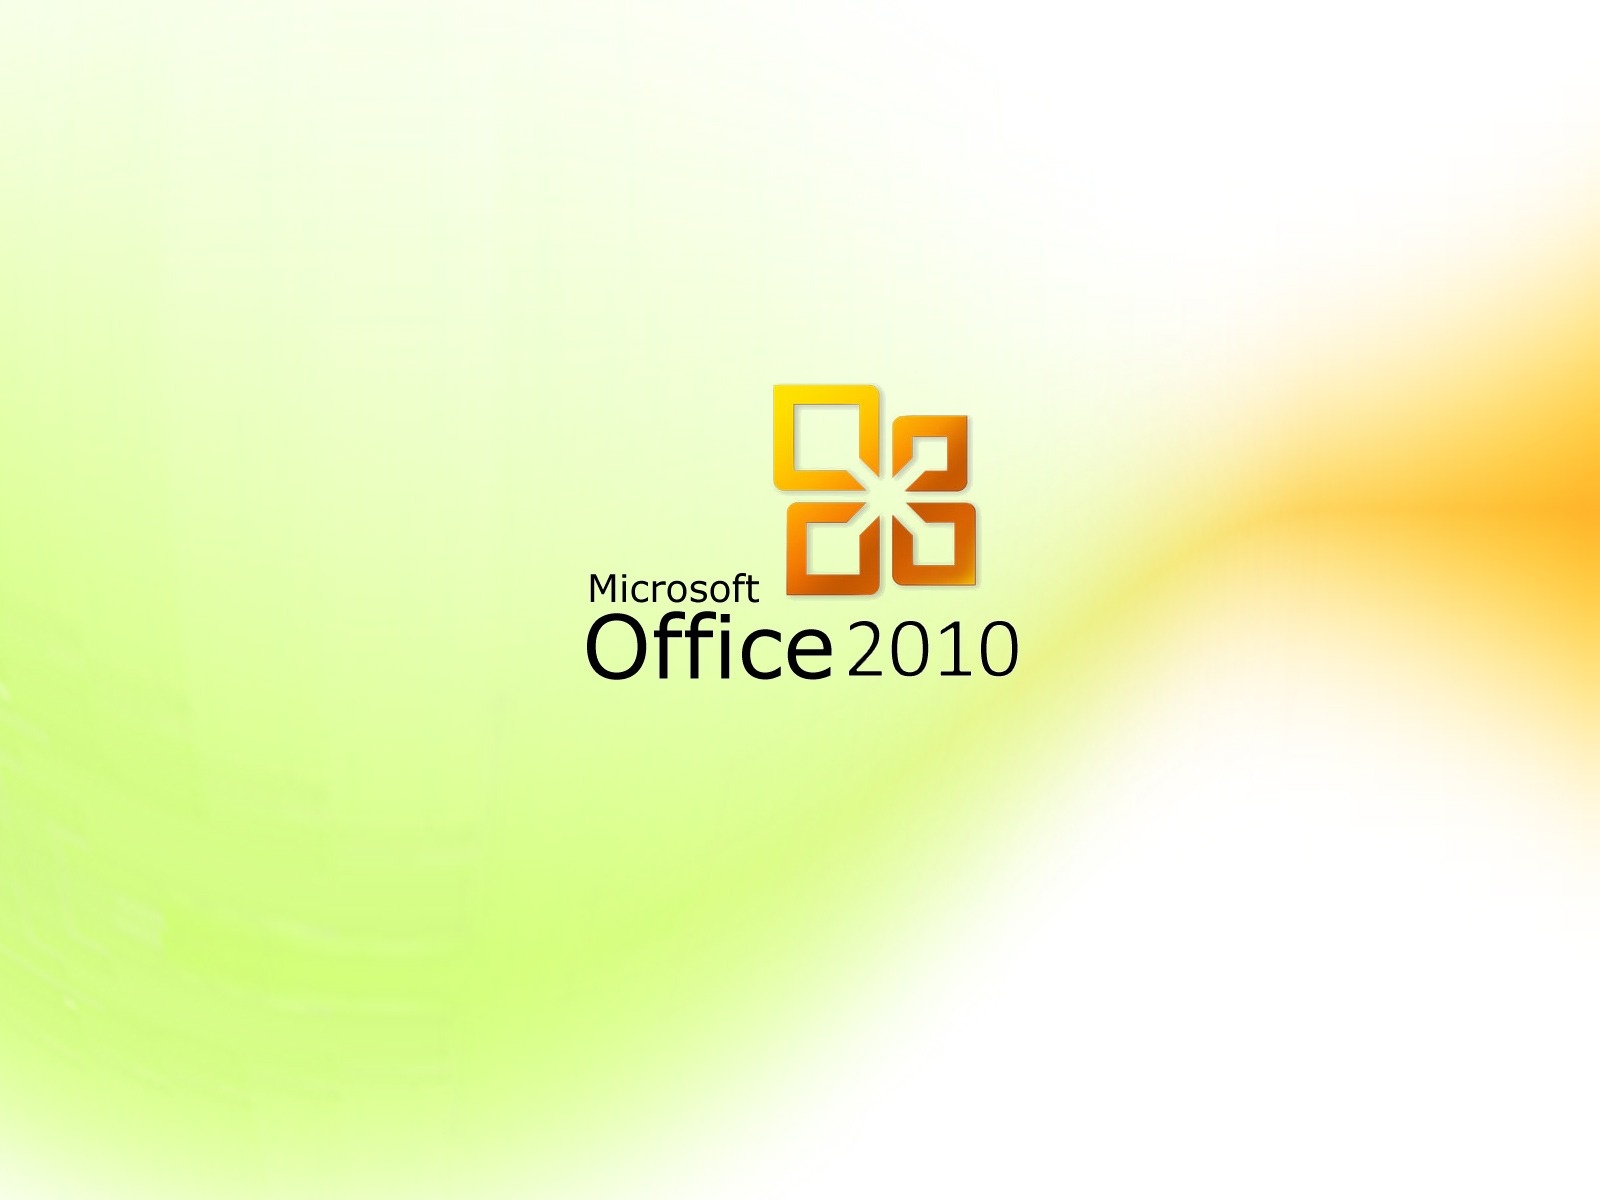 microsoft office 2010 free download for windows 7 64 bit with crack